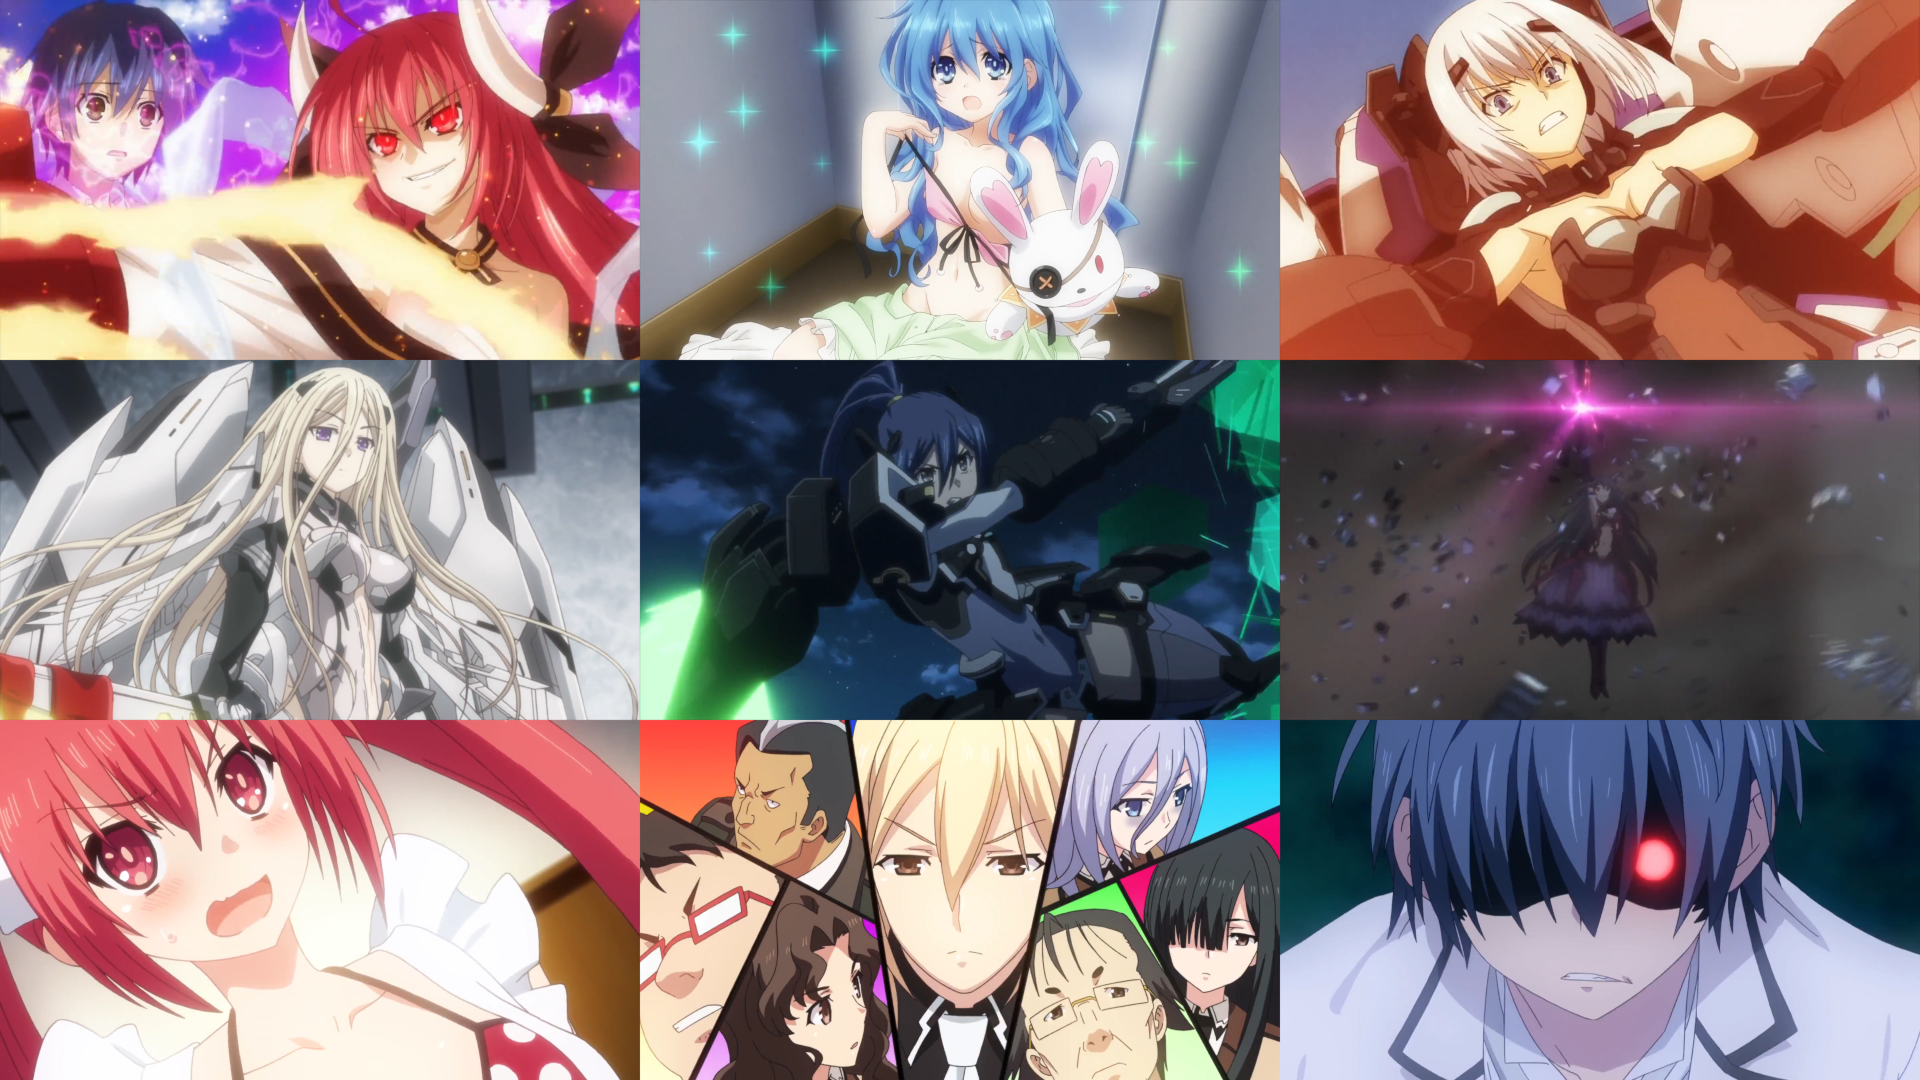 Date A Live - As the 6th Anniversary of Date A Live: Mayuri